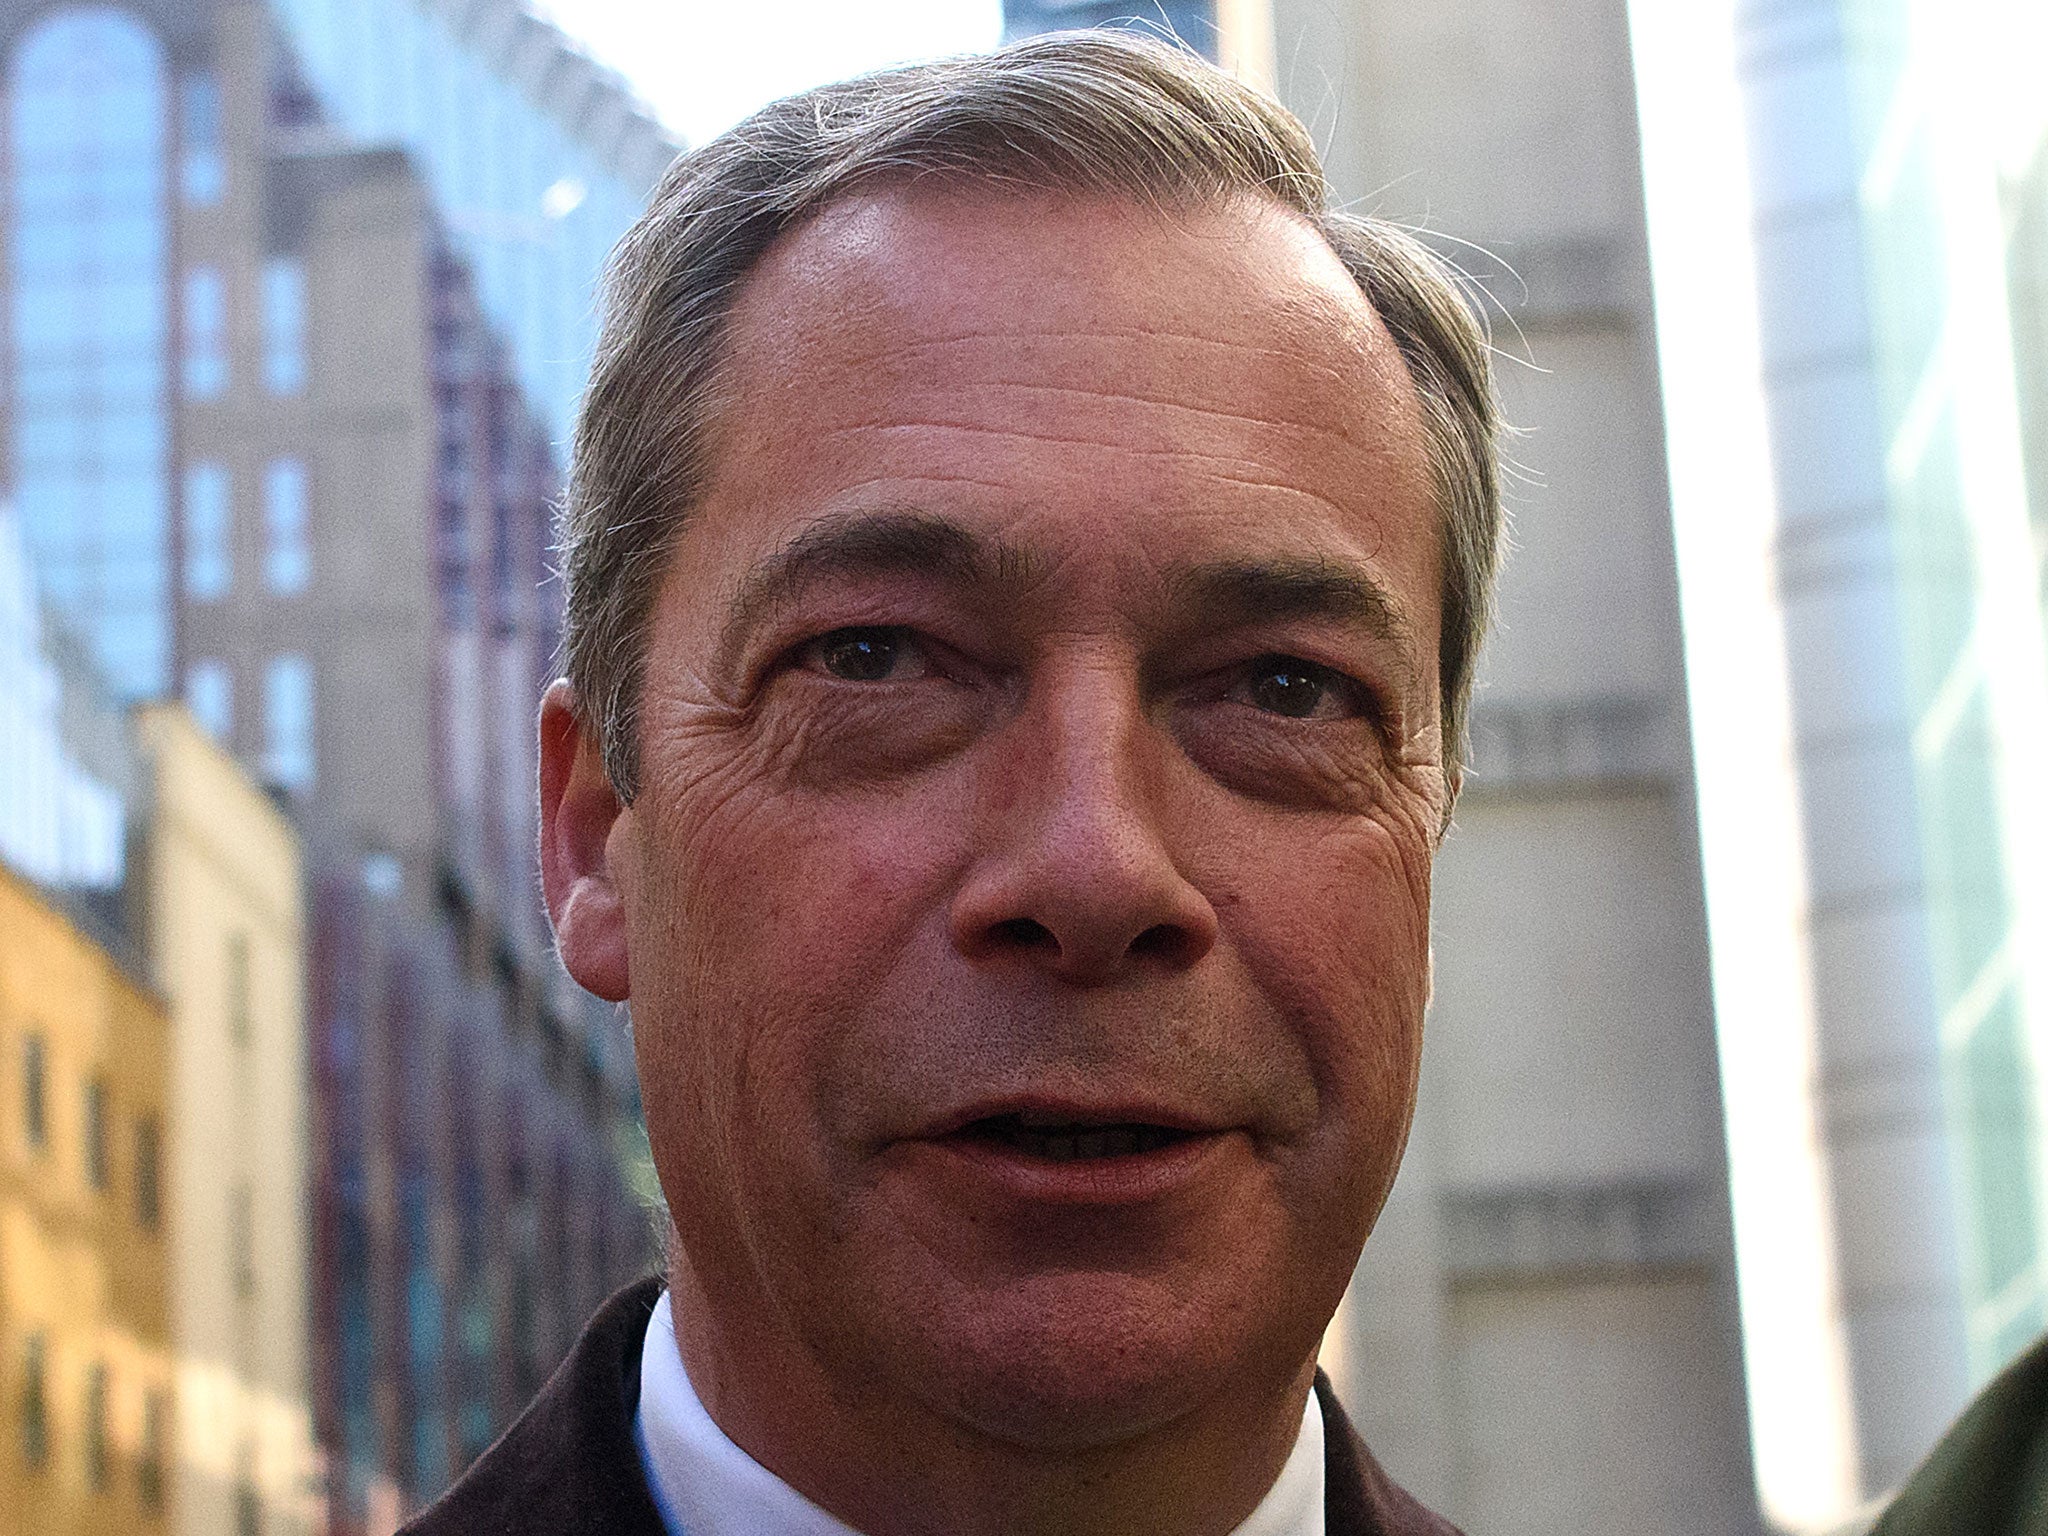 The Grassroots Out campaign includes Ukip’s Nigel Farage